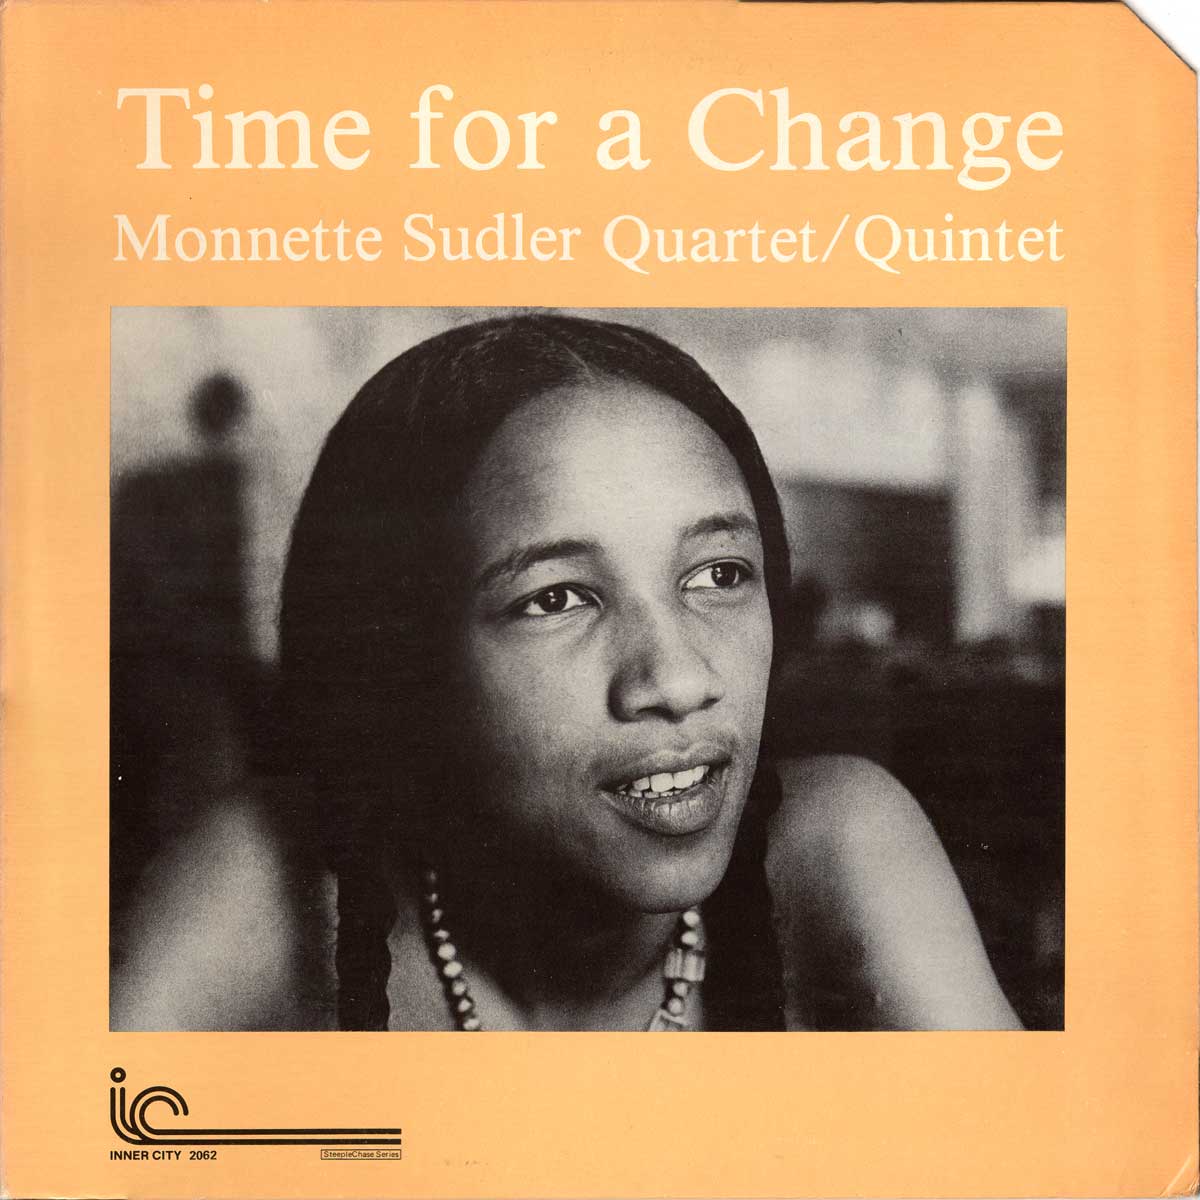 Monnette Sudler - Time for a Change - Front cover